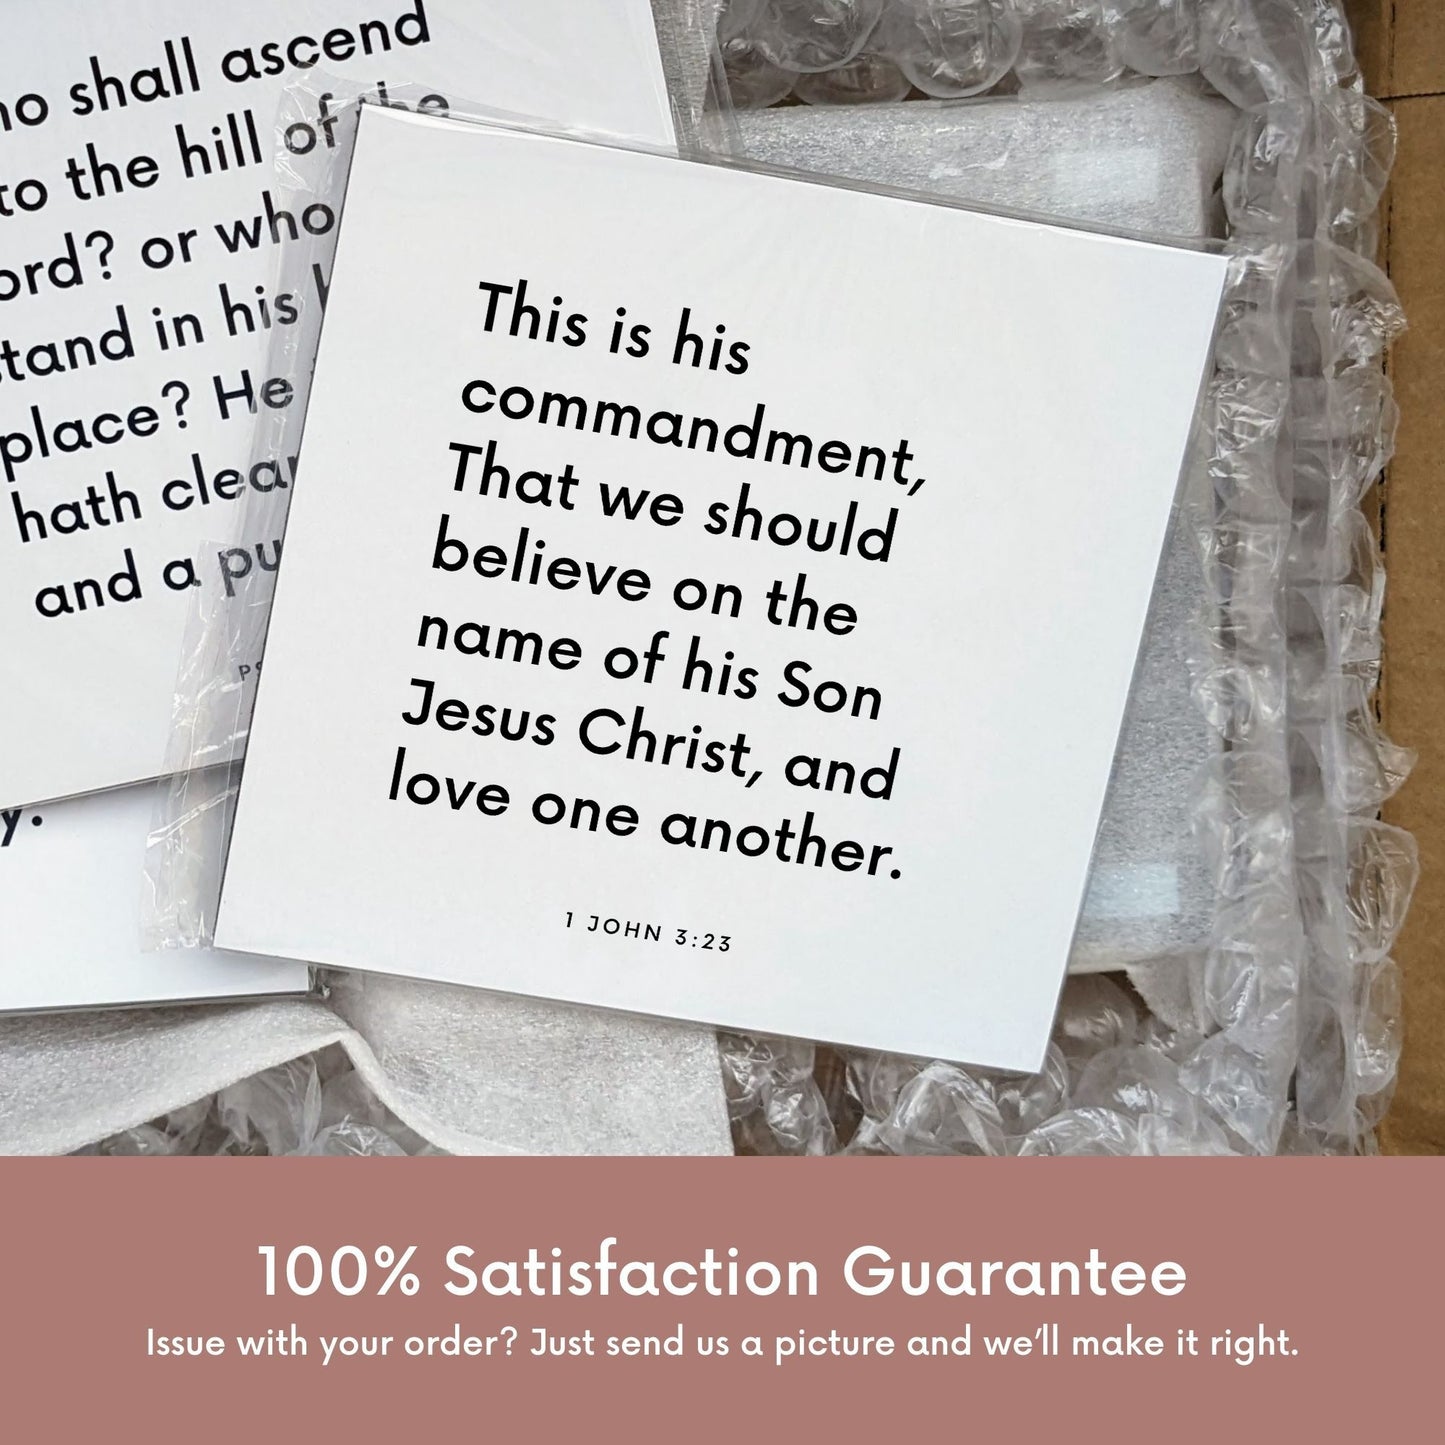 Shipping materials for scripture tile of 1 John 3:23 - "We should believe on the name of his Son"